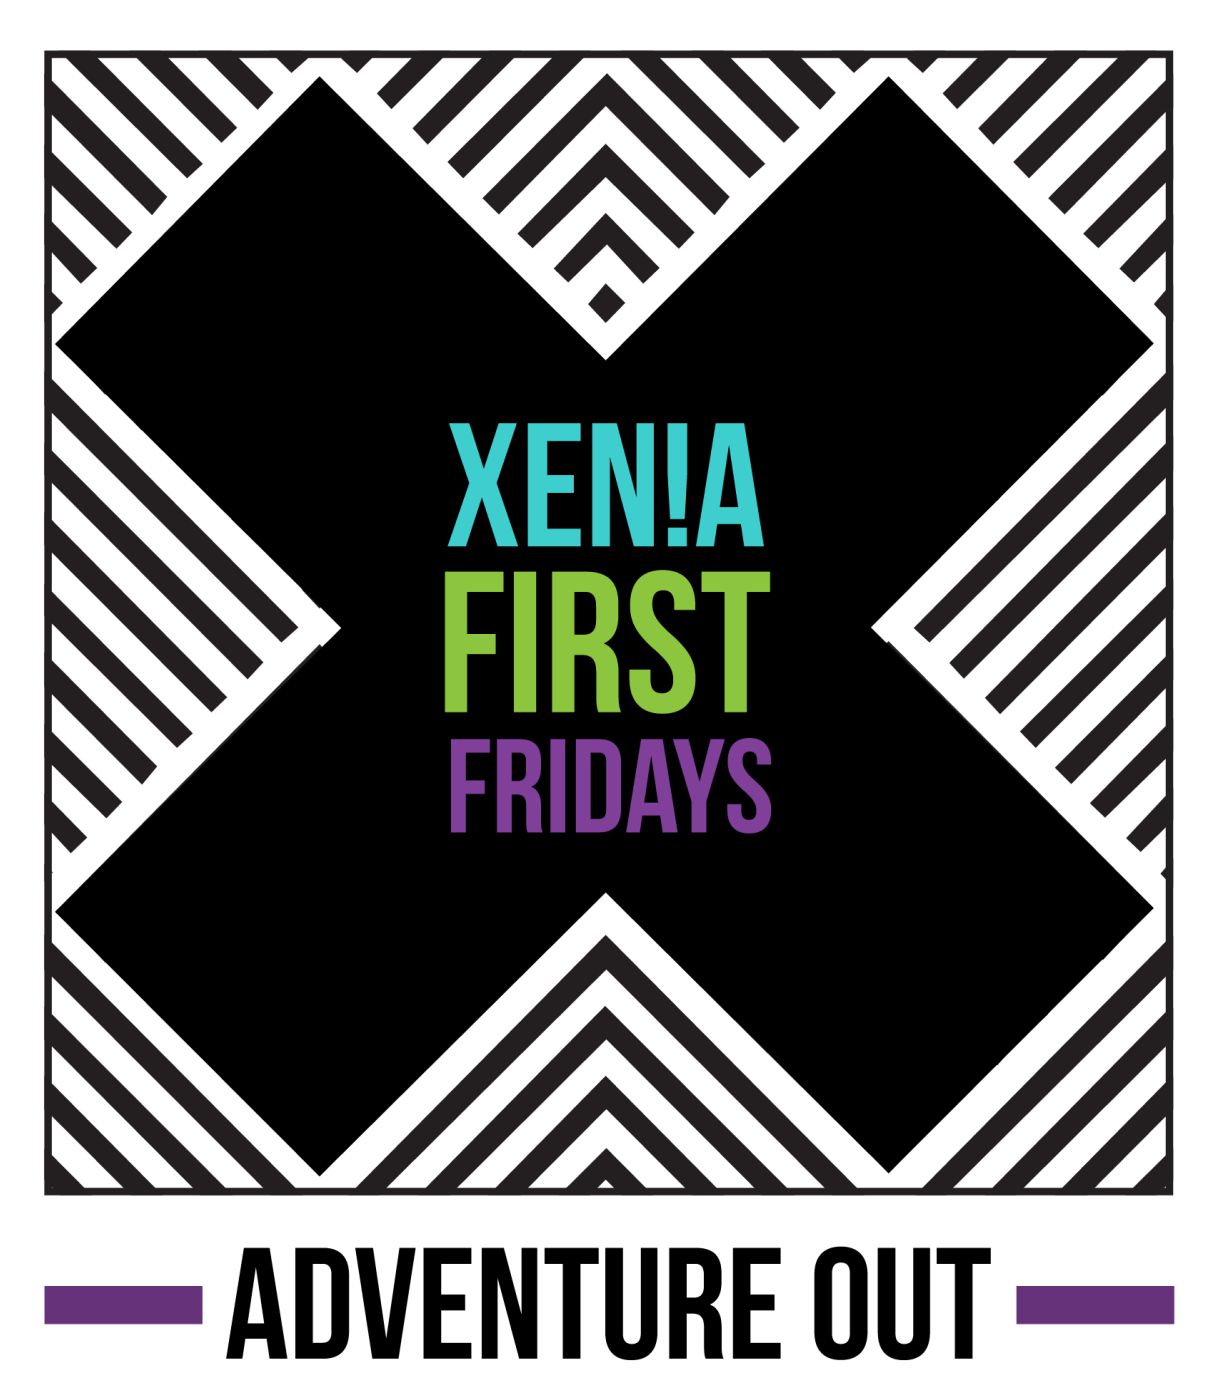 Xenia is celebrating July’s First Friday with a Bang!